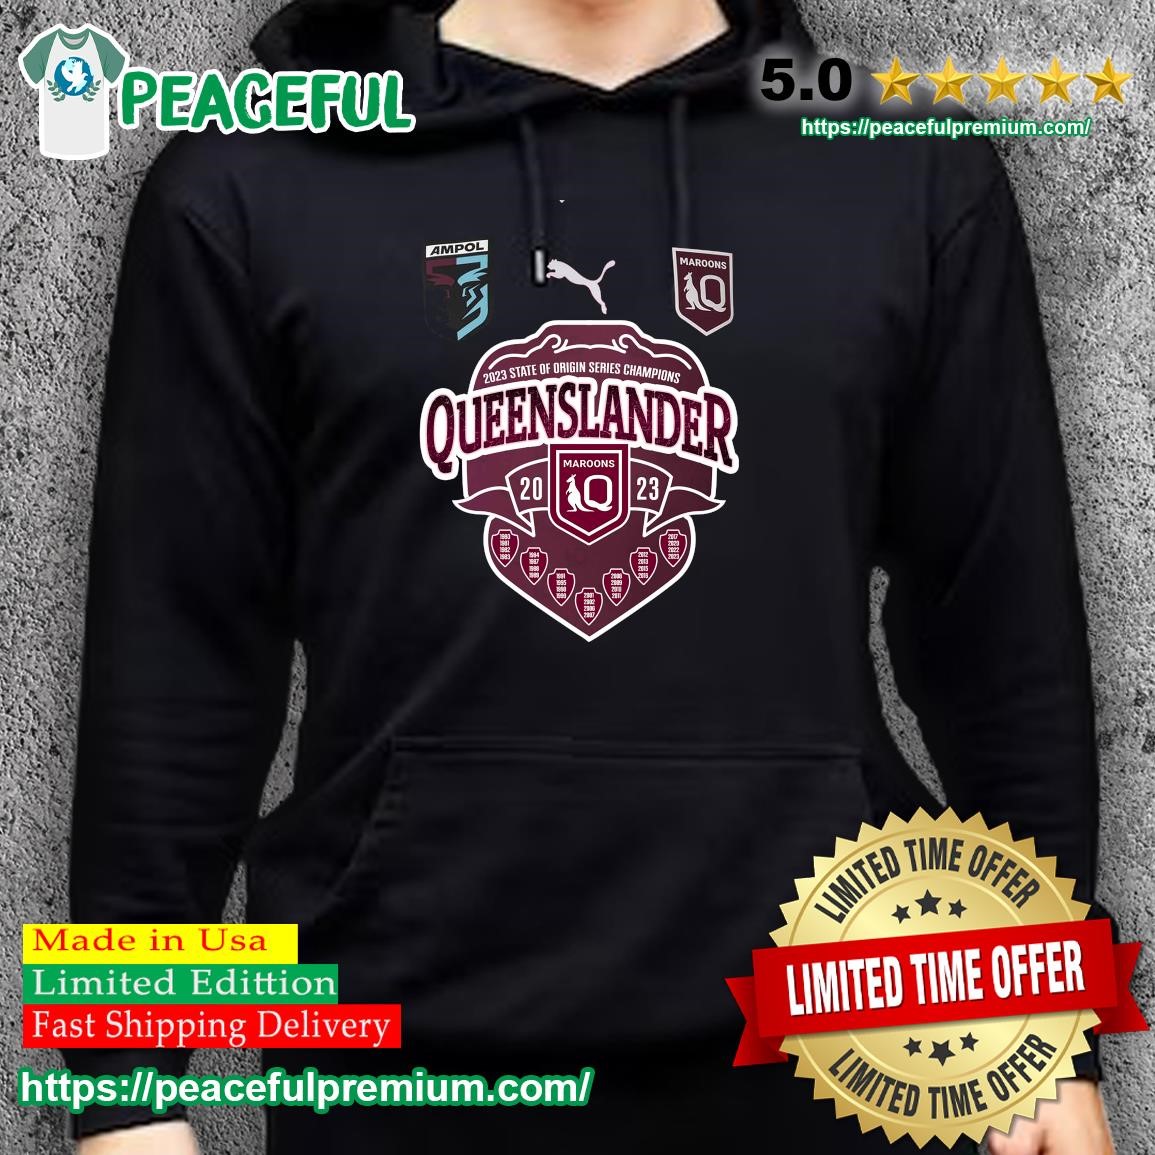 2023 State Of Origin Champions Queensland Maroons Shirt, hoodie, sweater,  long sleeve and tank top